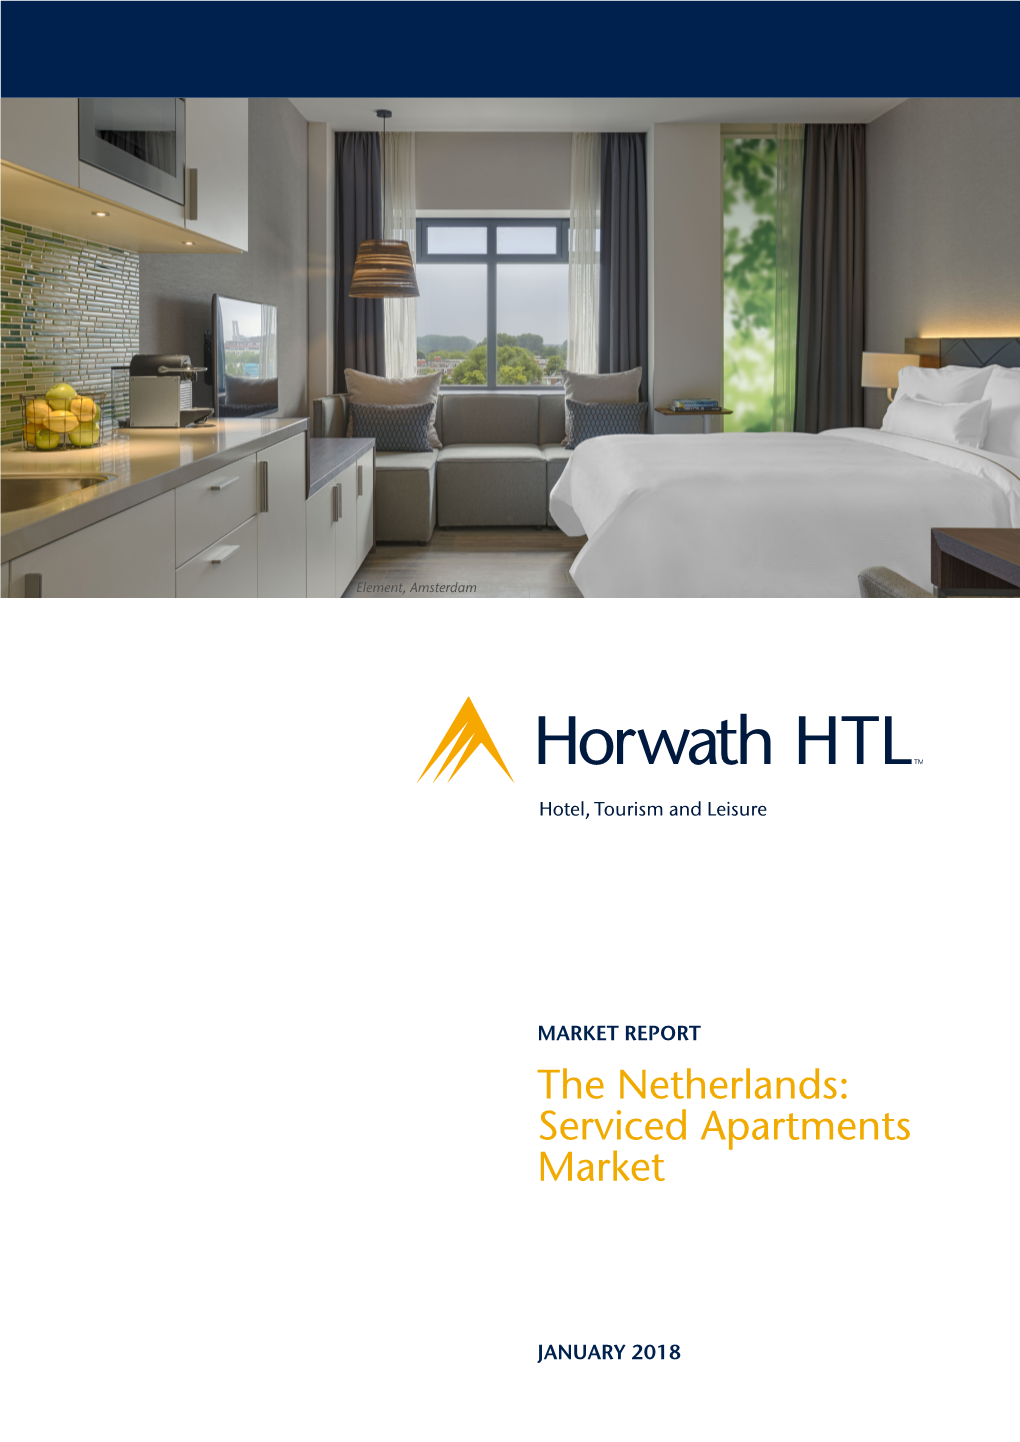 The Netherlands: Serviced Apartments Market